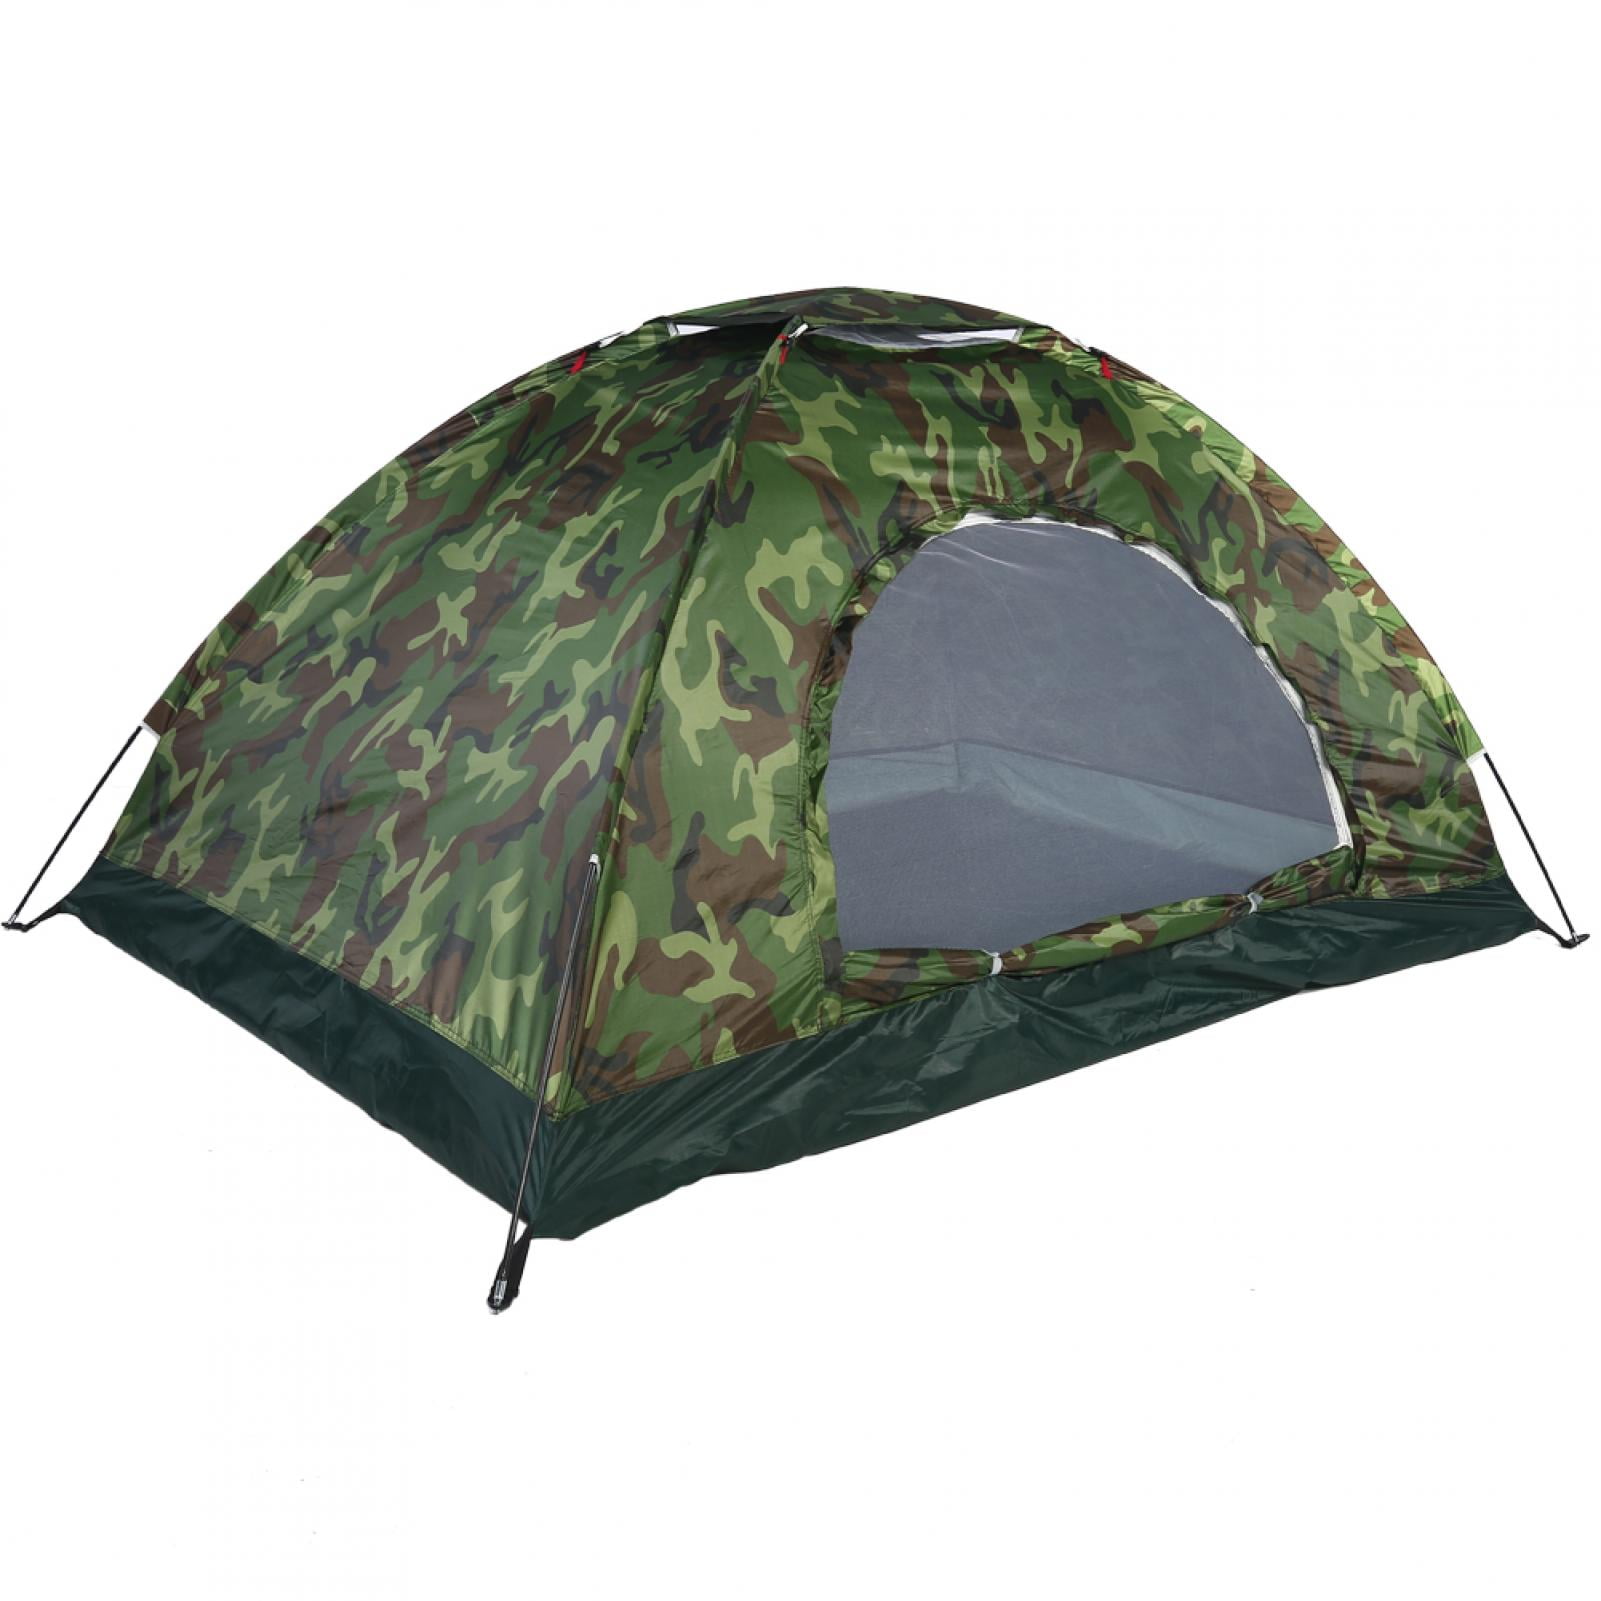 Multifunction Tent Outdoor Camouflage Design Net Cover Anti UV Picnic Army Gift 